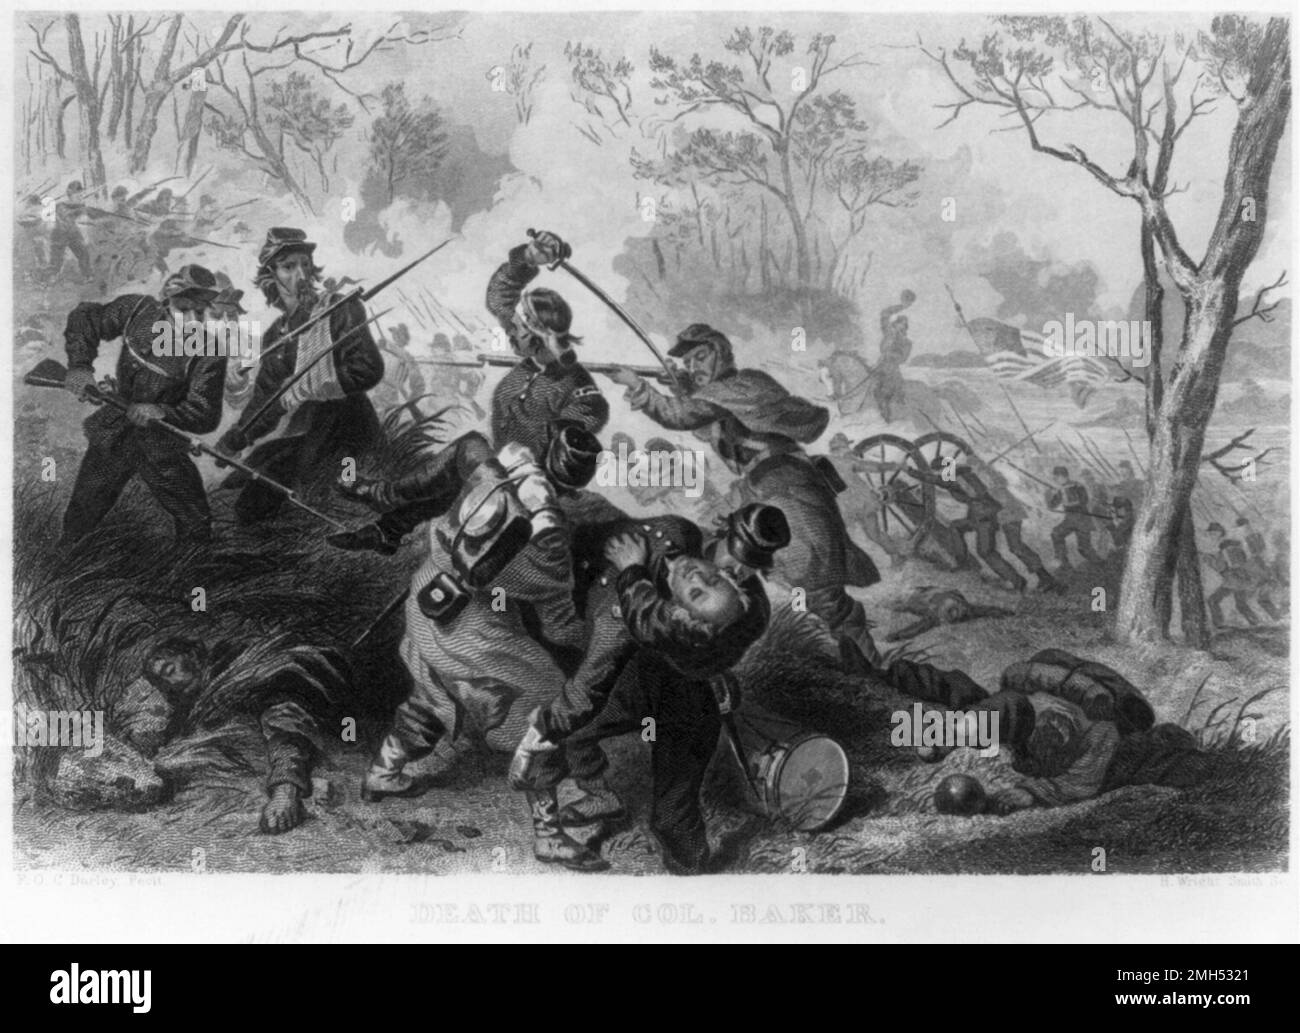 he Battle of Ball's Bluff was a battle in the American Civil War fought on October 21st 1861. It was won by the Confederate forces under General Nathan Evans and the Unionist senator,who was fighting as a colonel, was killed in the action. This painting depicts the death of Colonel Baker. Stock Photo